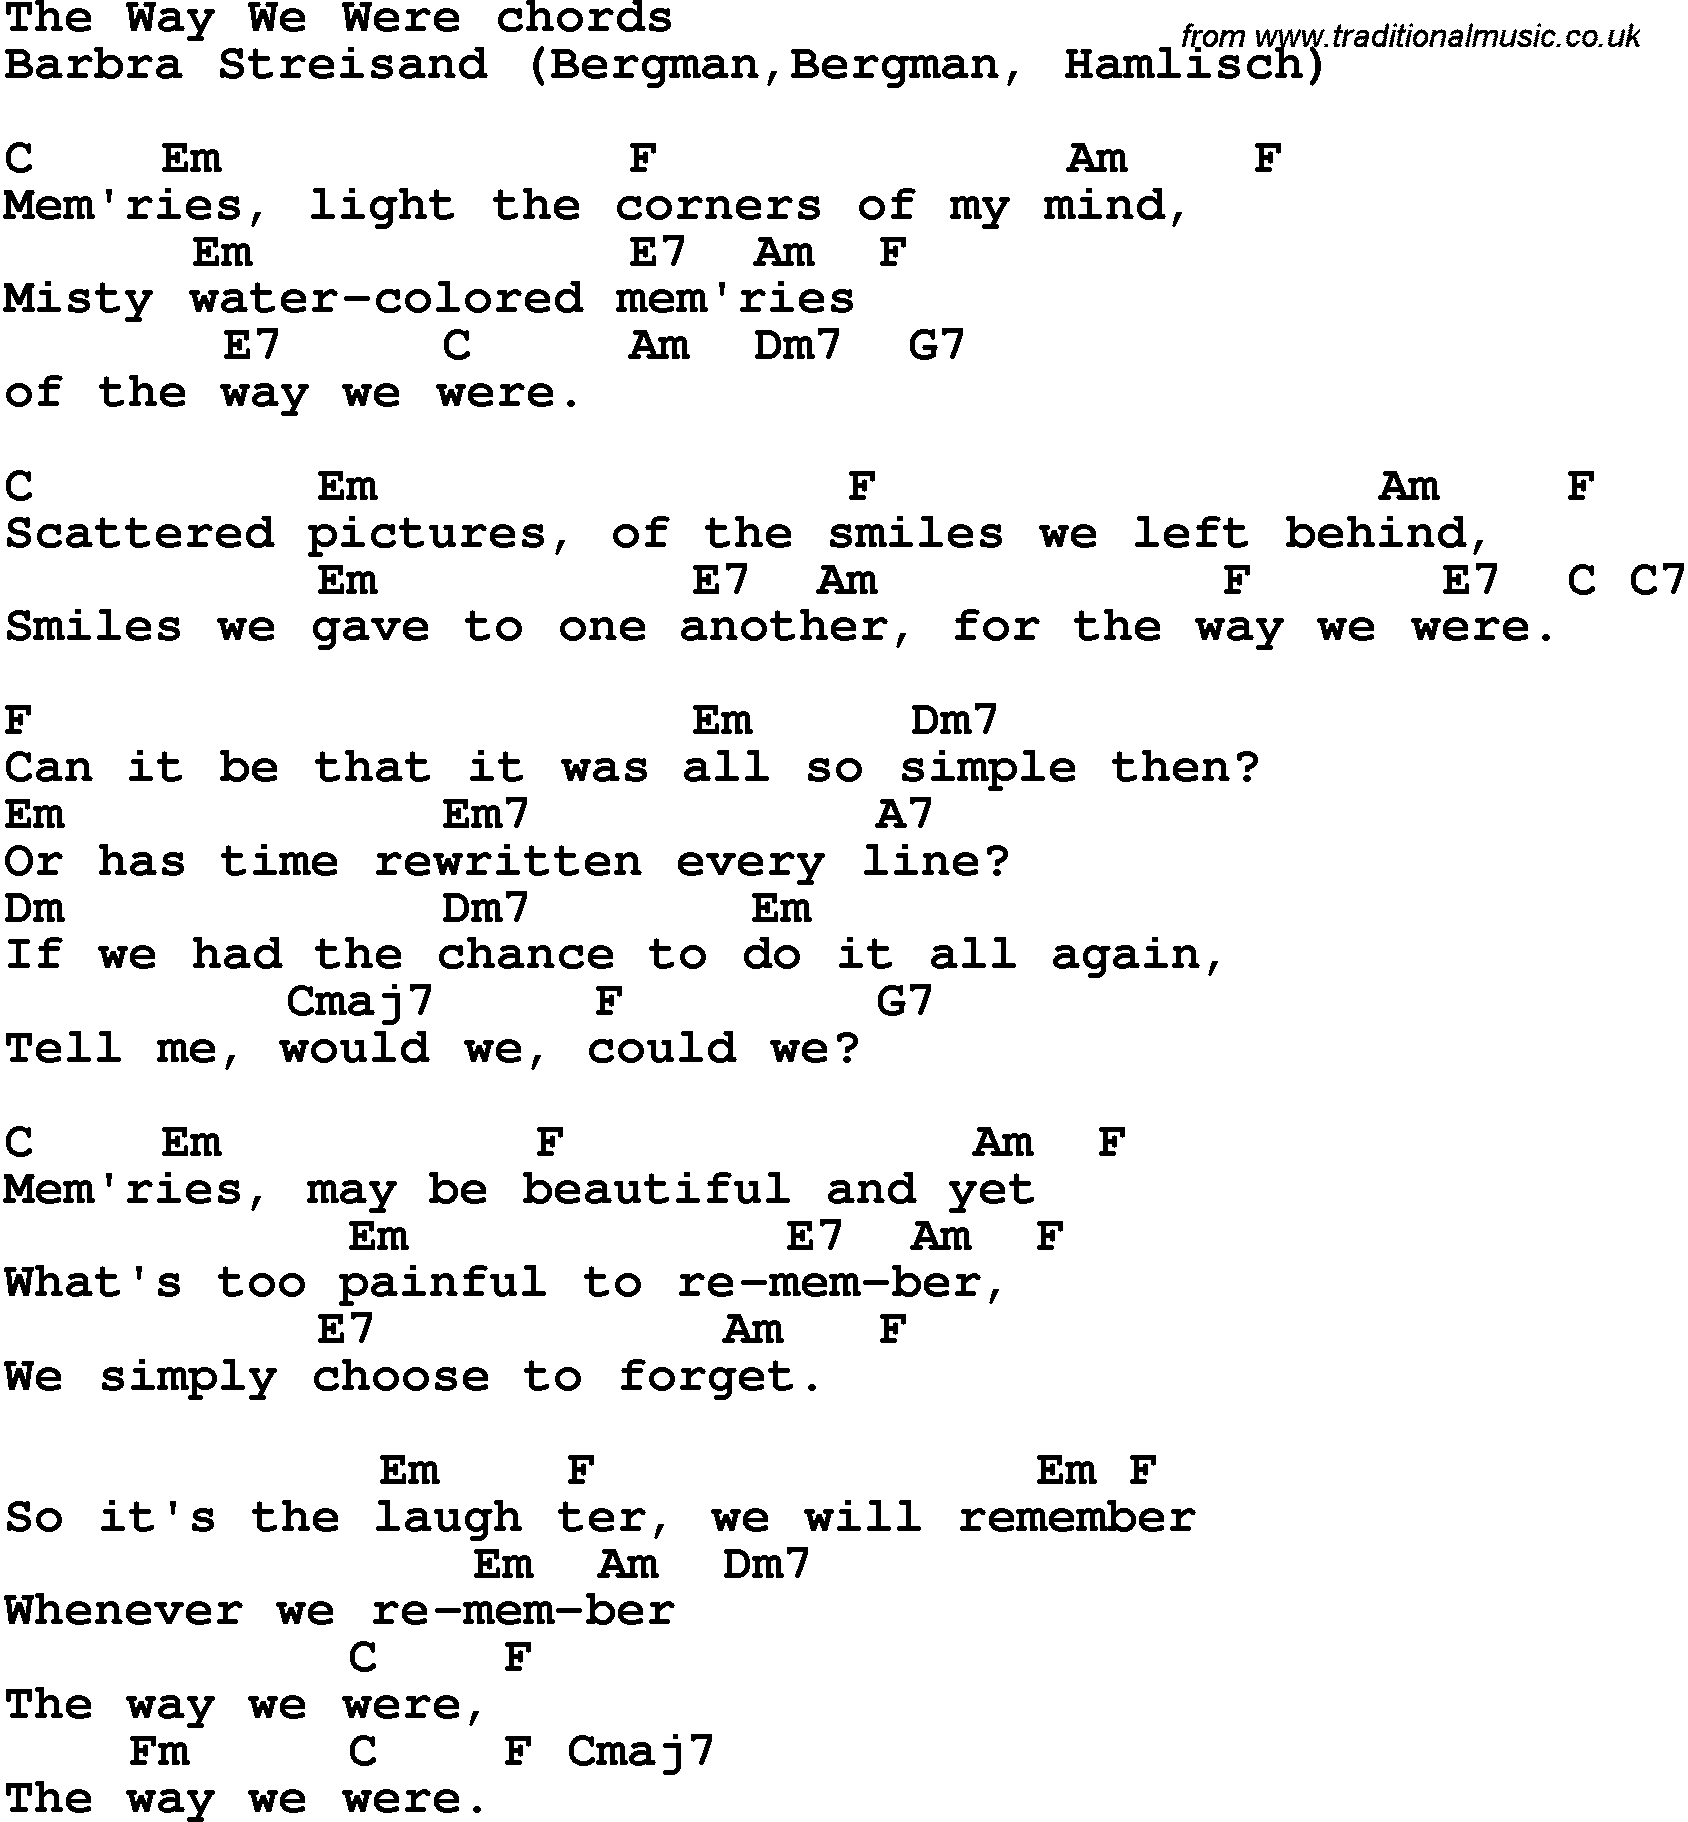 Song Lyrics with guitar chords for The Way We Were - Barbra Streisand